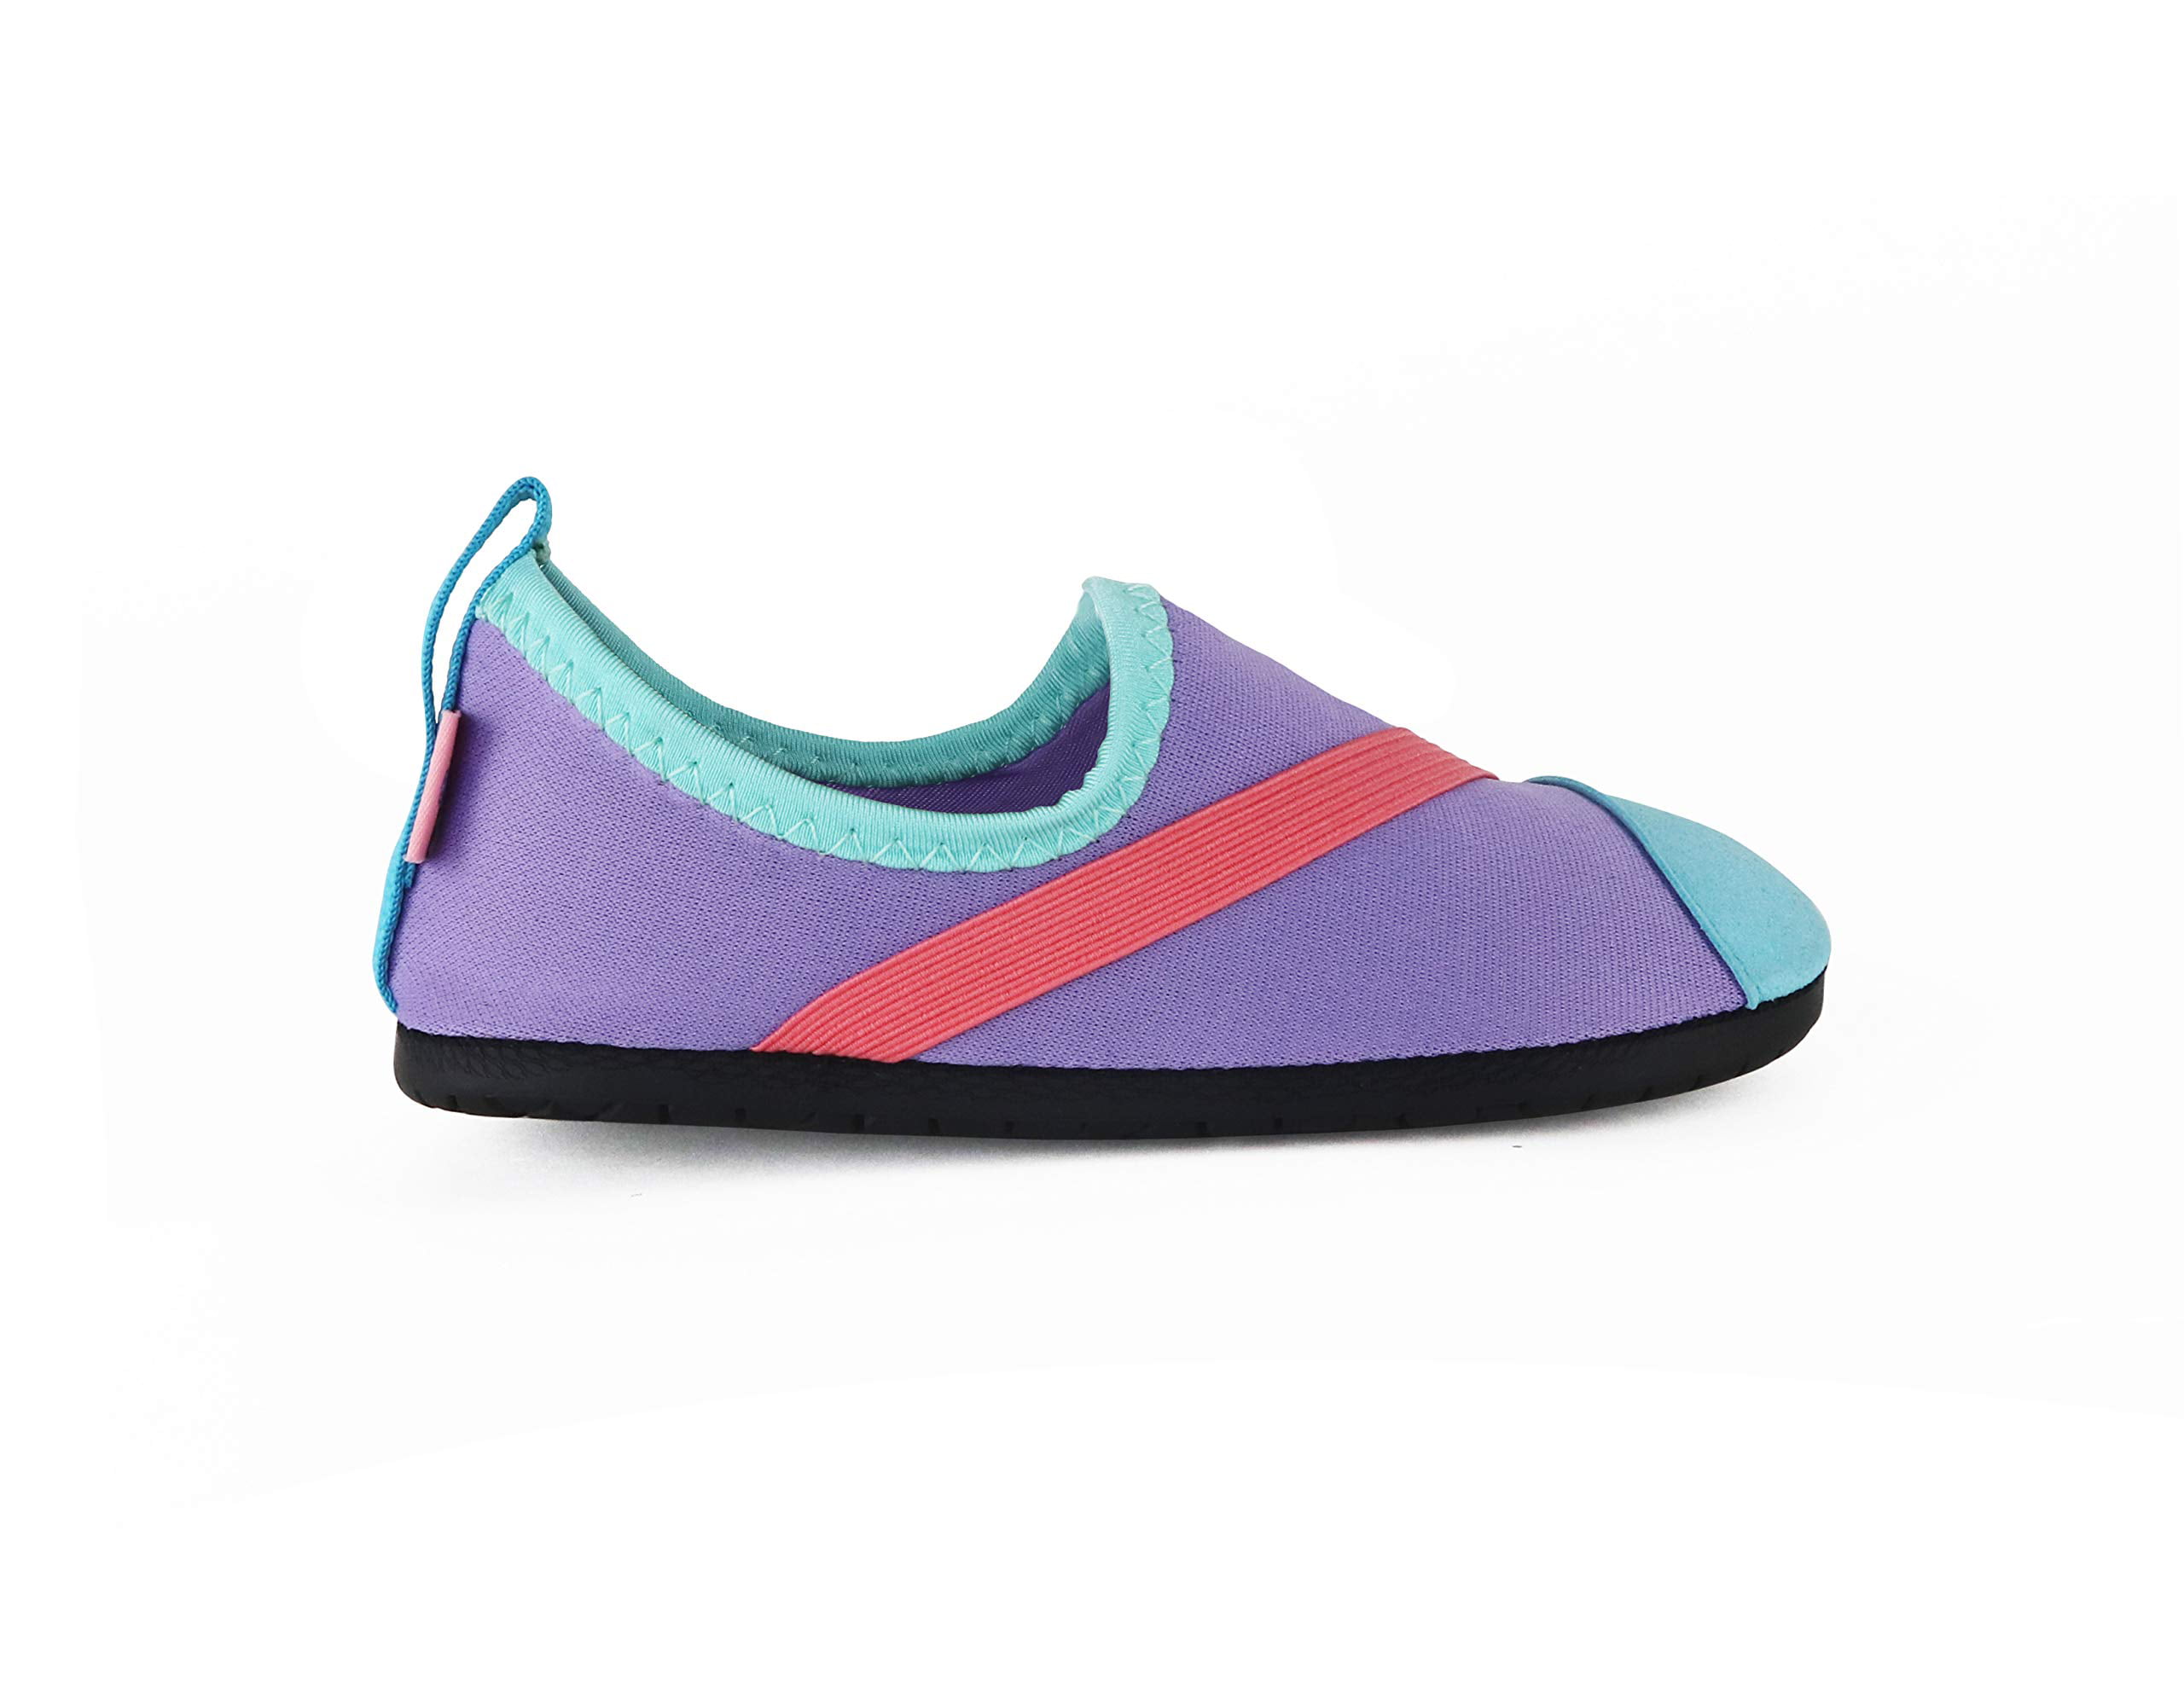 FitKicks FITKIDS Active Lifestyle Footwear Shoes for Kids 